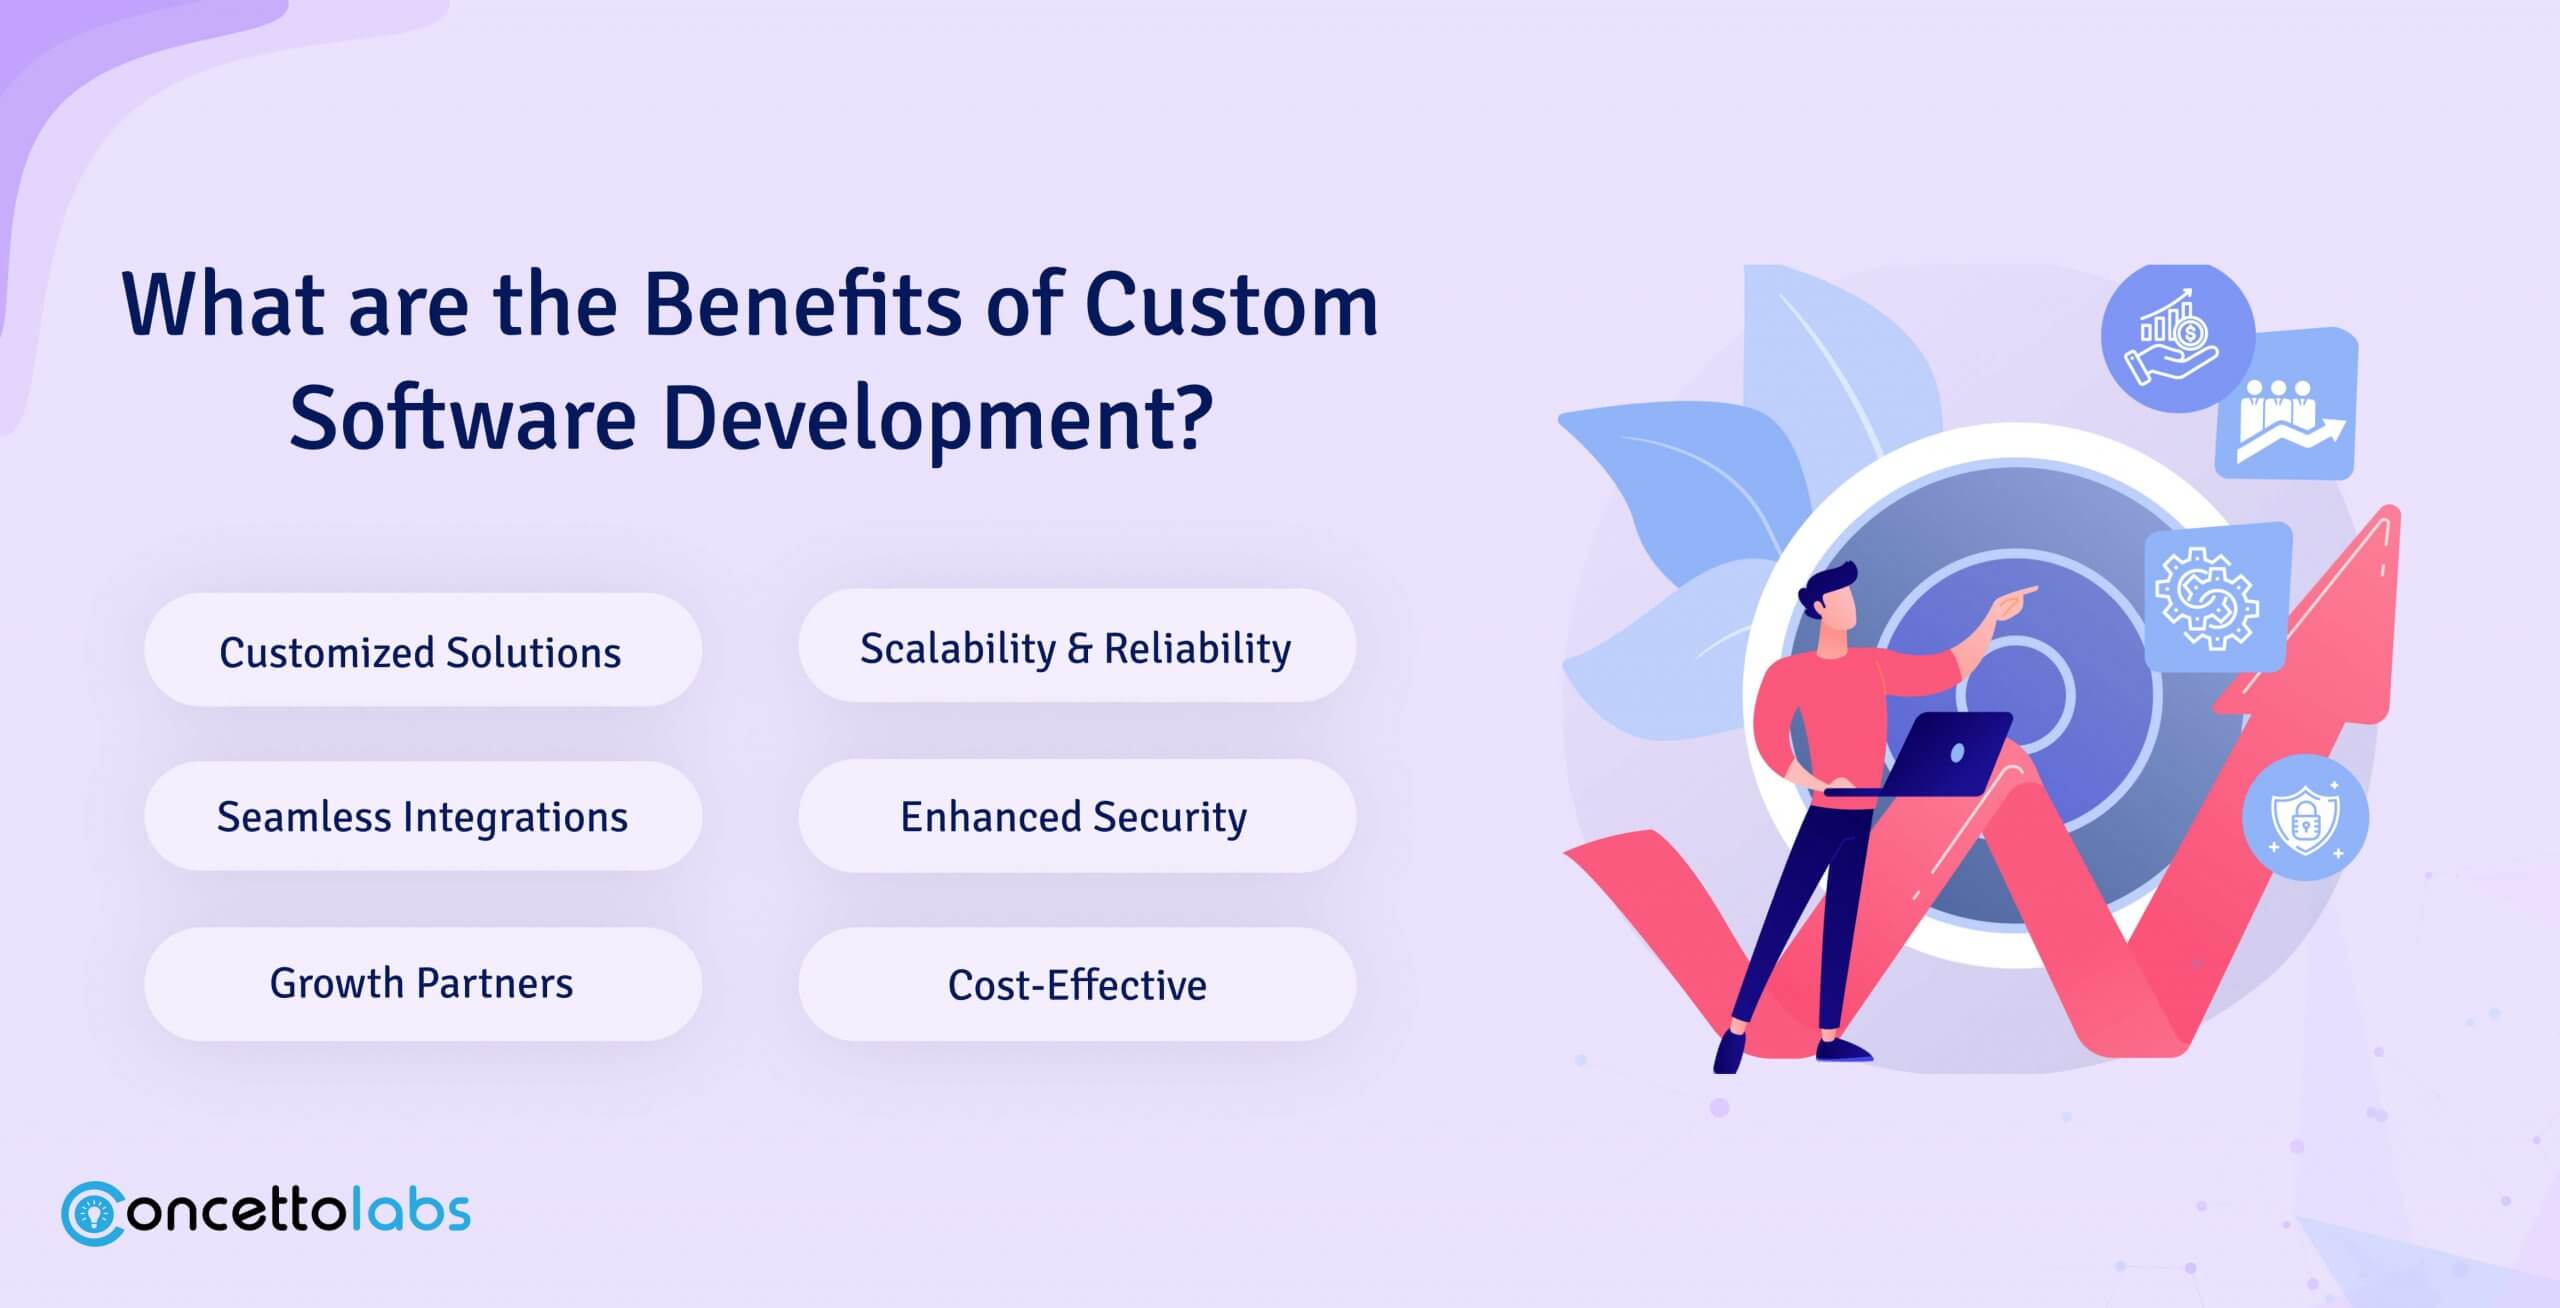 What are the Benefits of Custom Software Development?